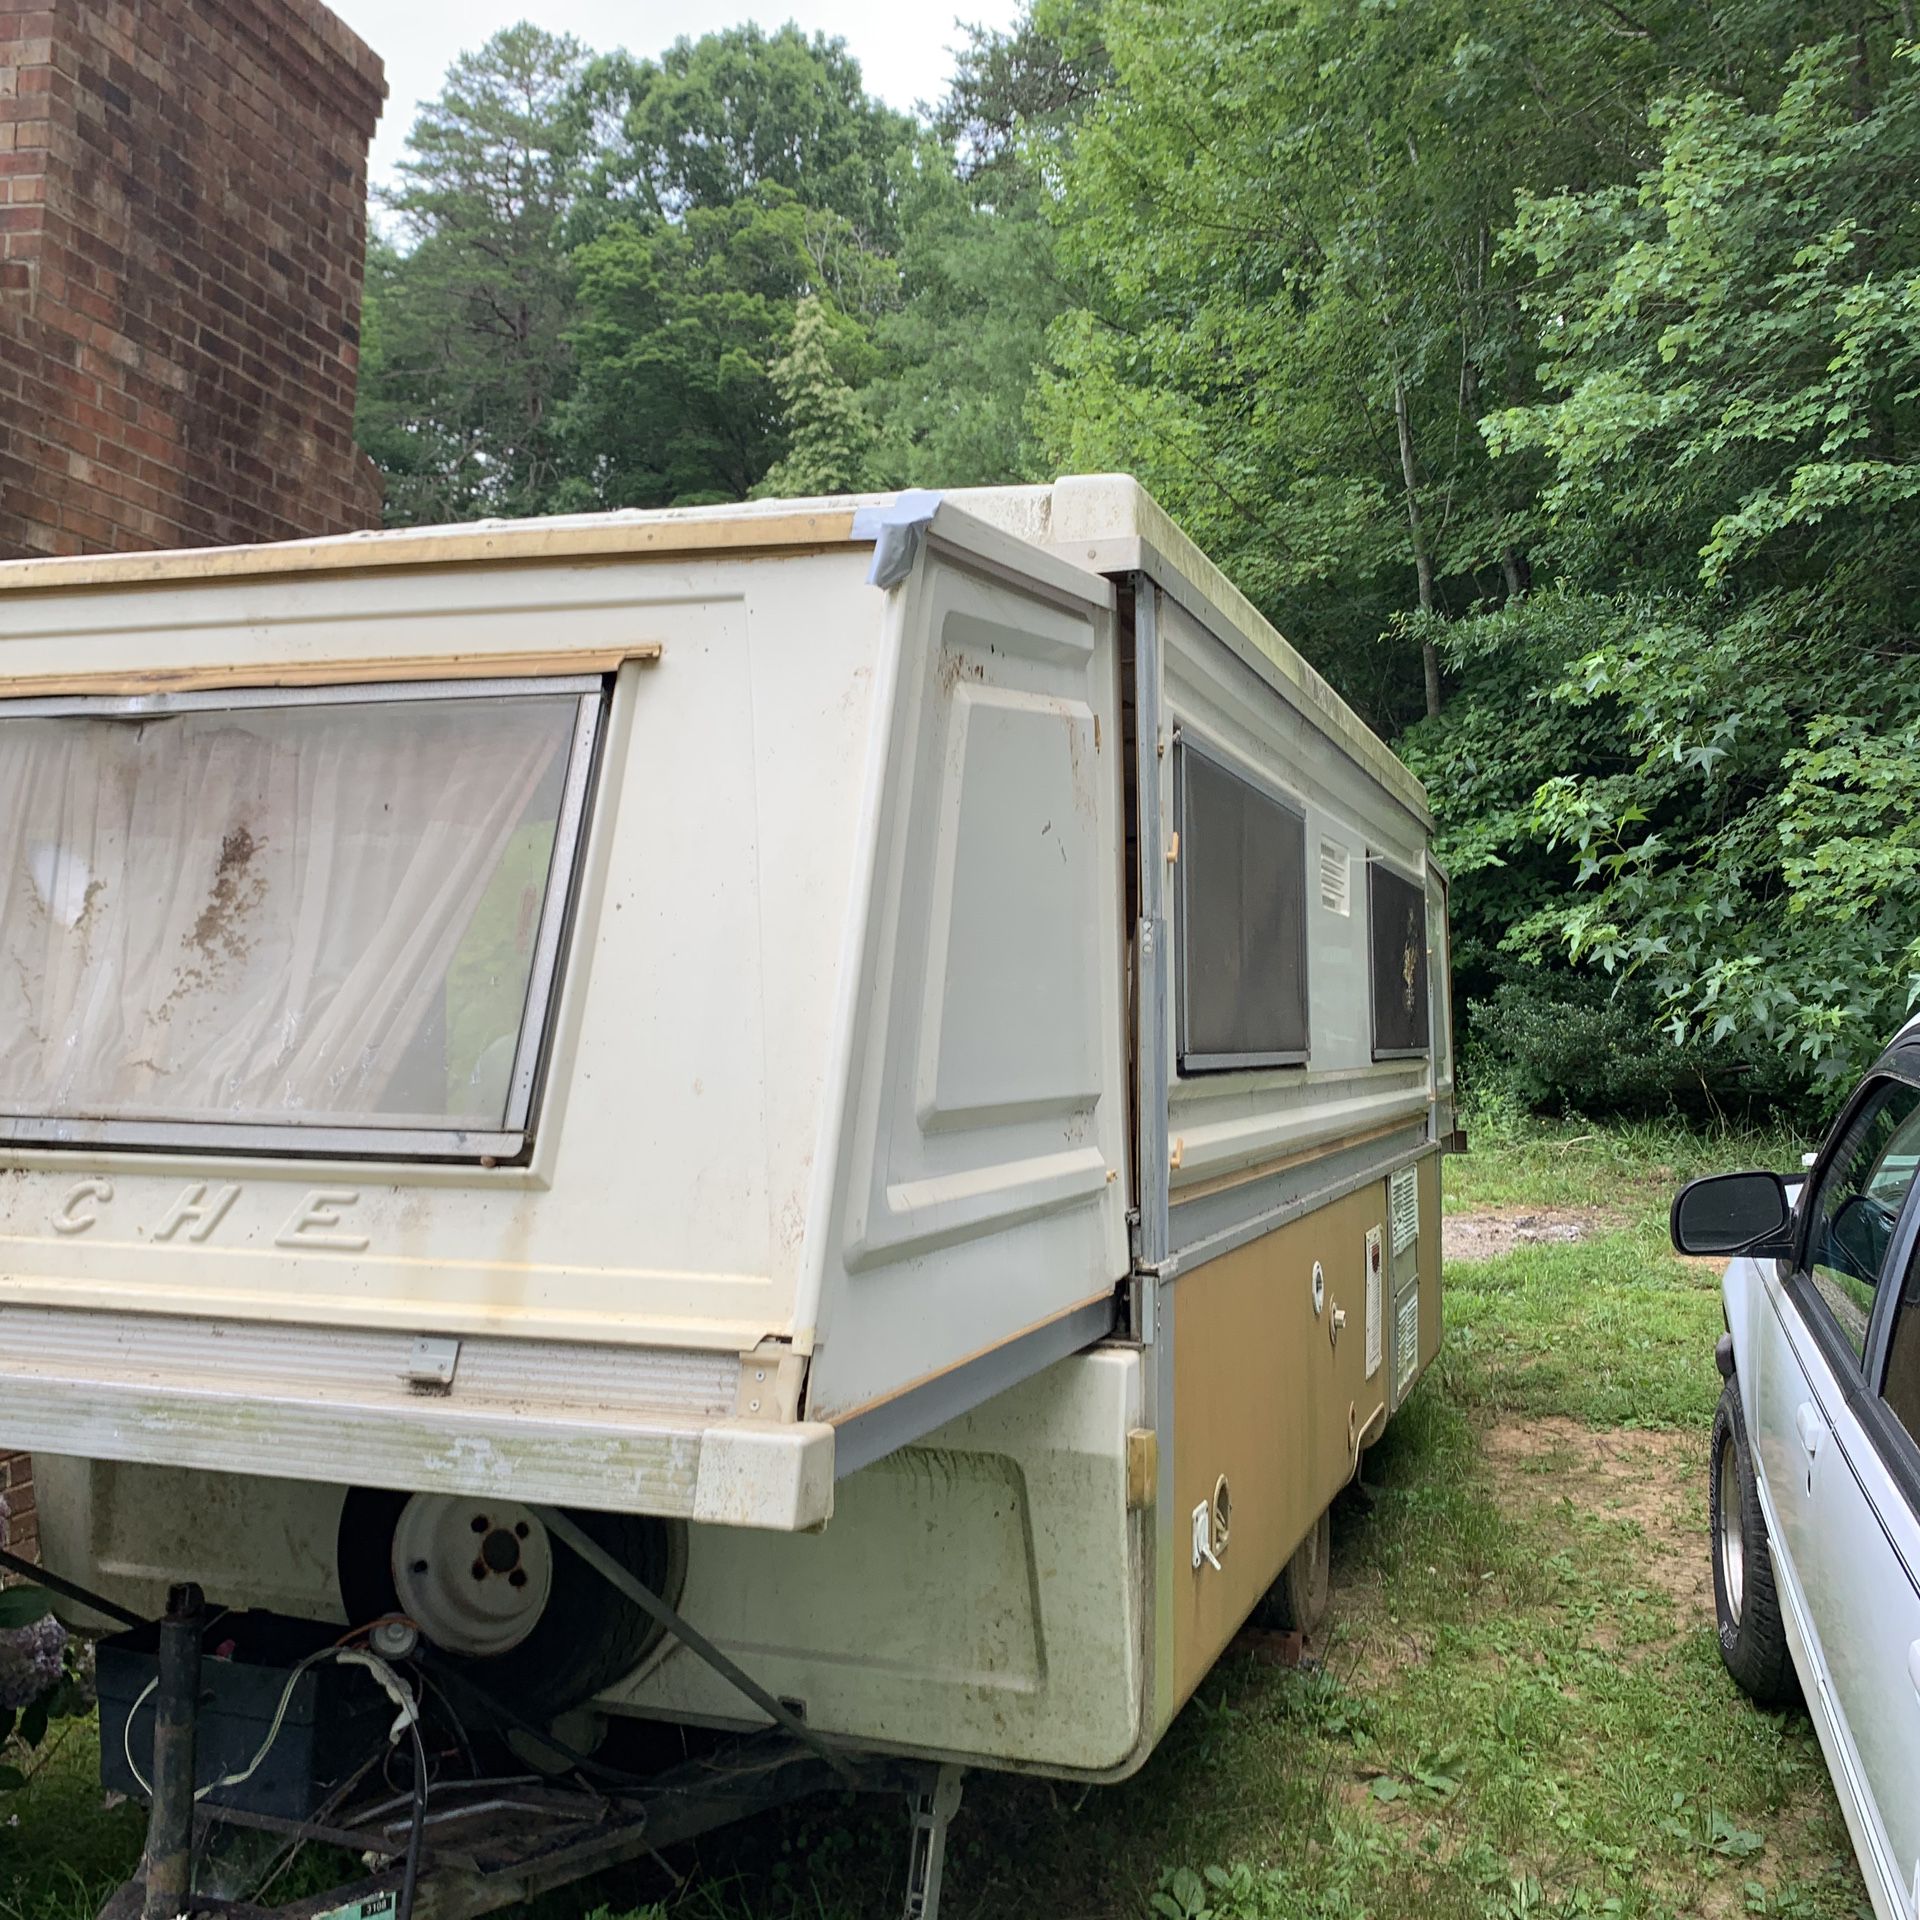 Apache hard sided camper 13 feet closed and 24 feet open needs cleaning and recover cushions